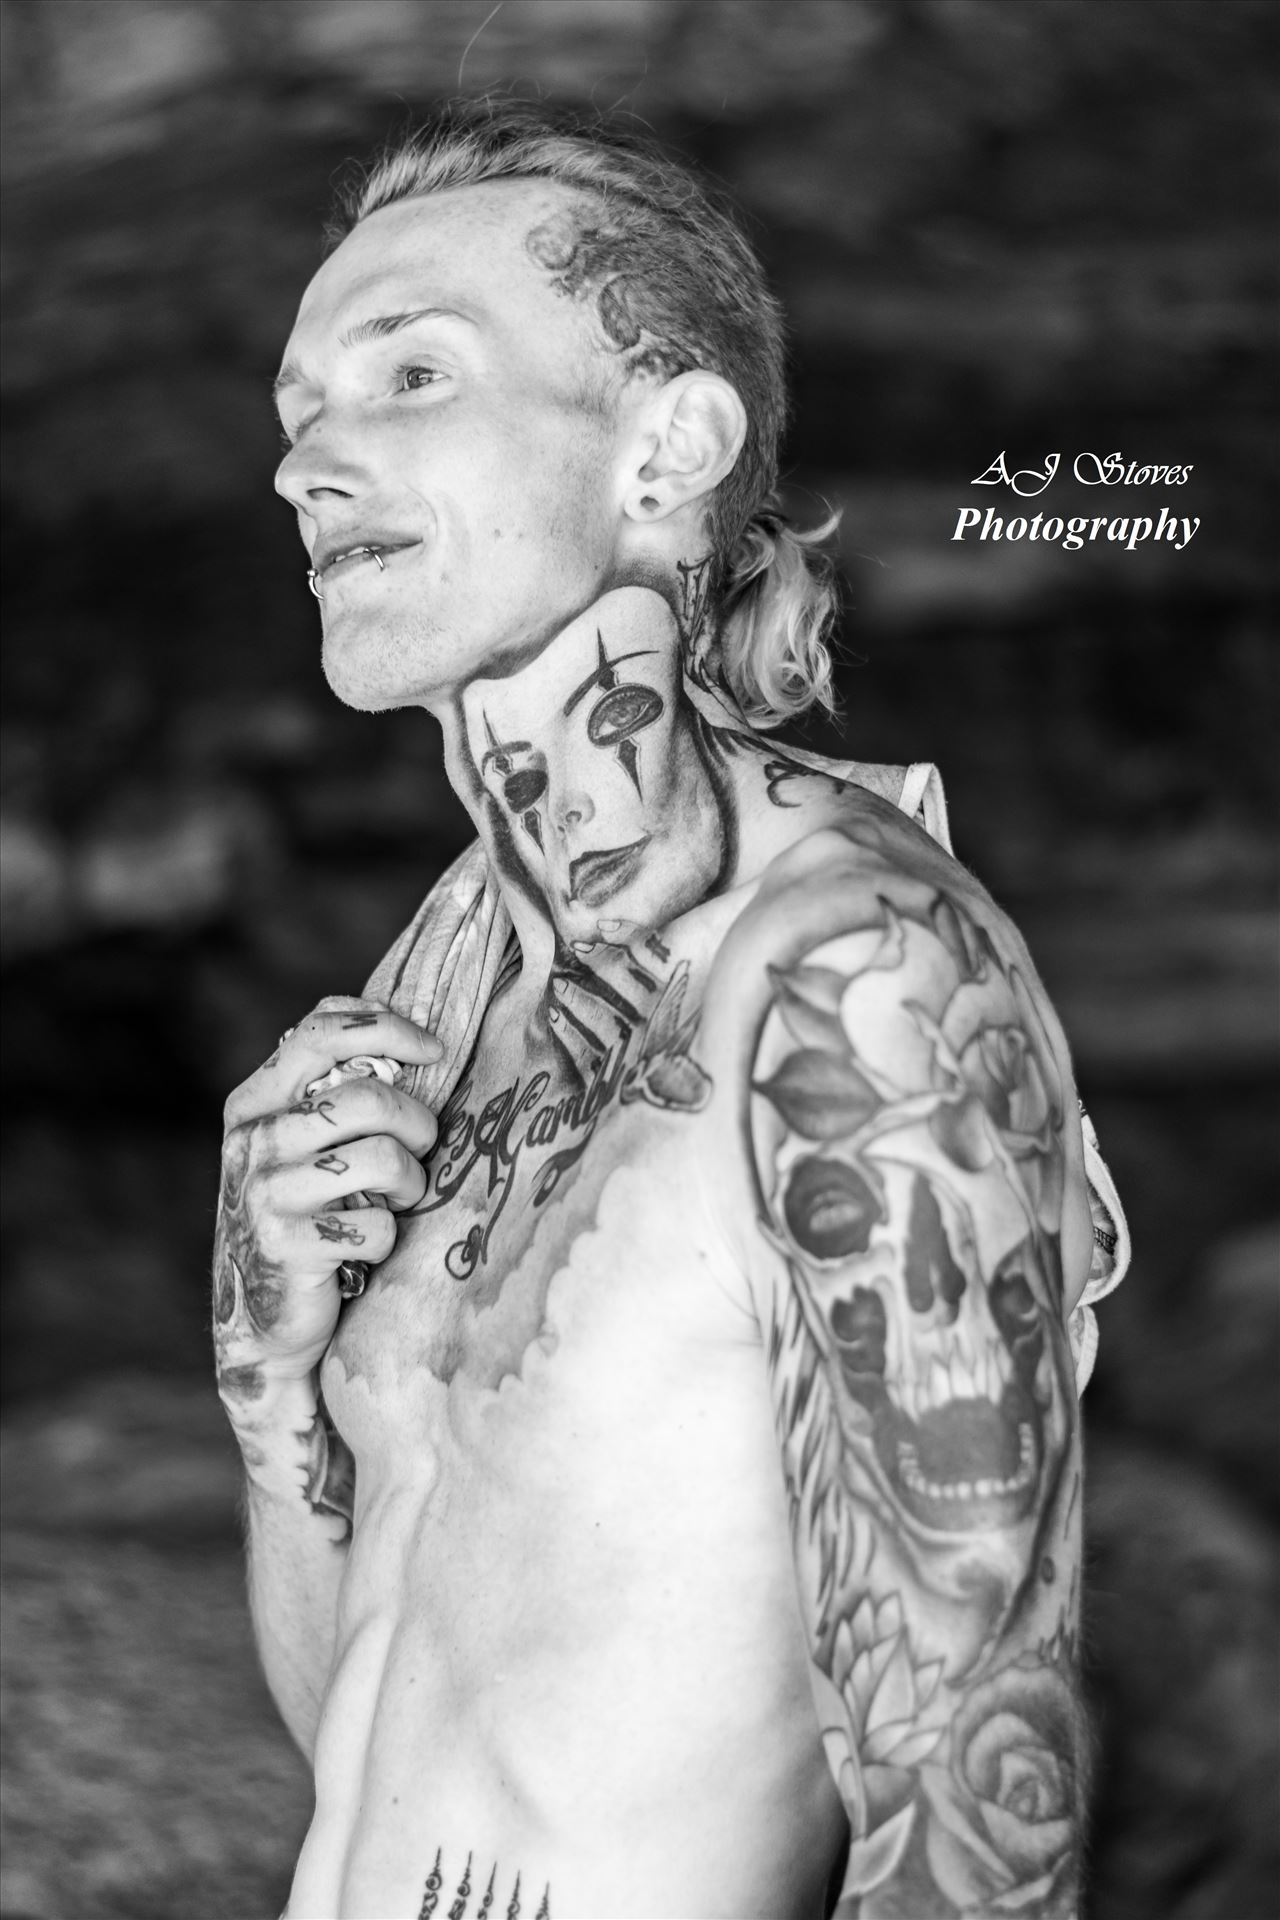 Luke Proctor 13 - Great shoot with Luke down Seaham Beach by AJ Stoves Photography